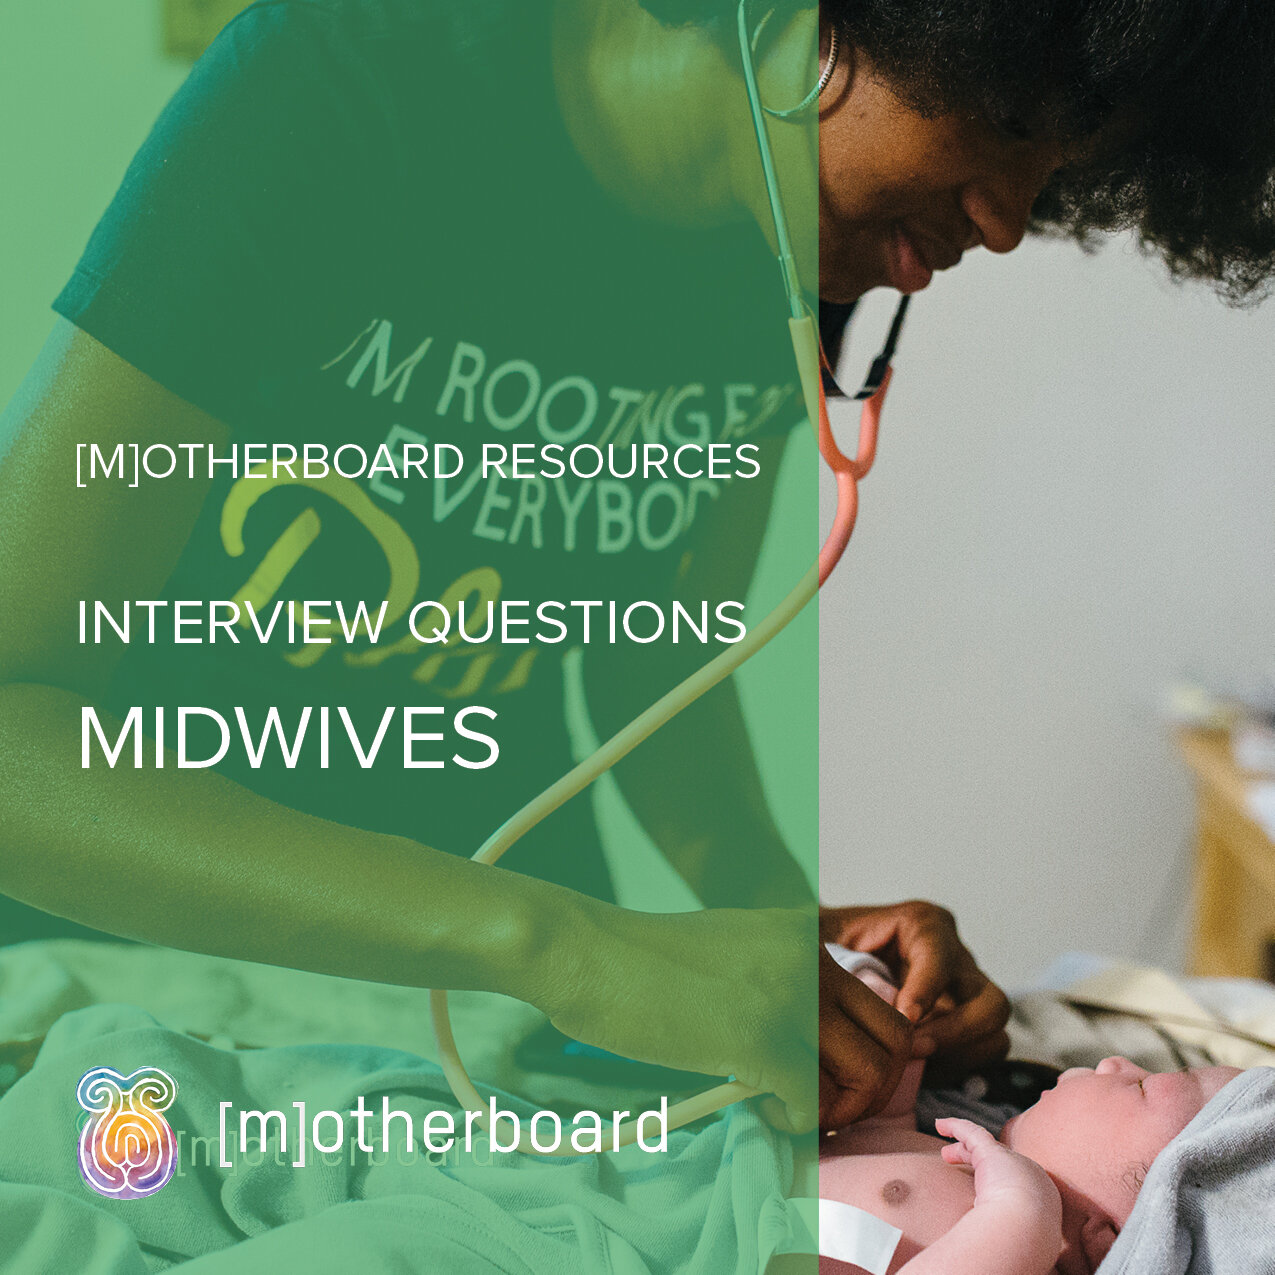 Copy of INTERVIEWING MIDWIVES